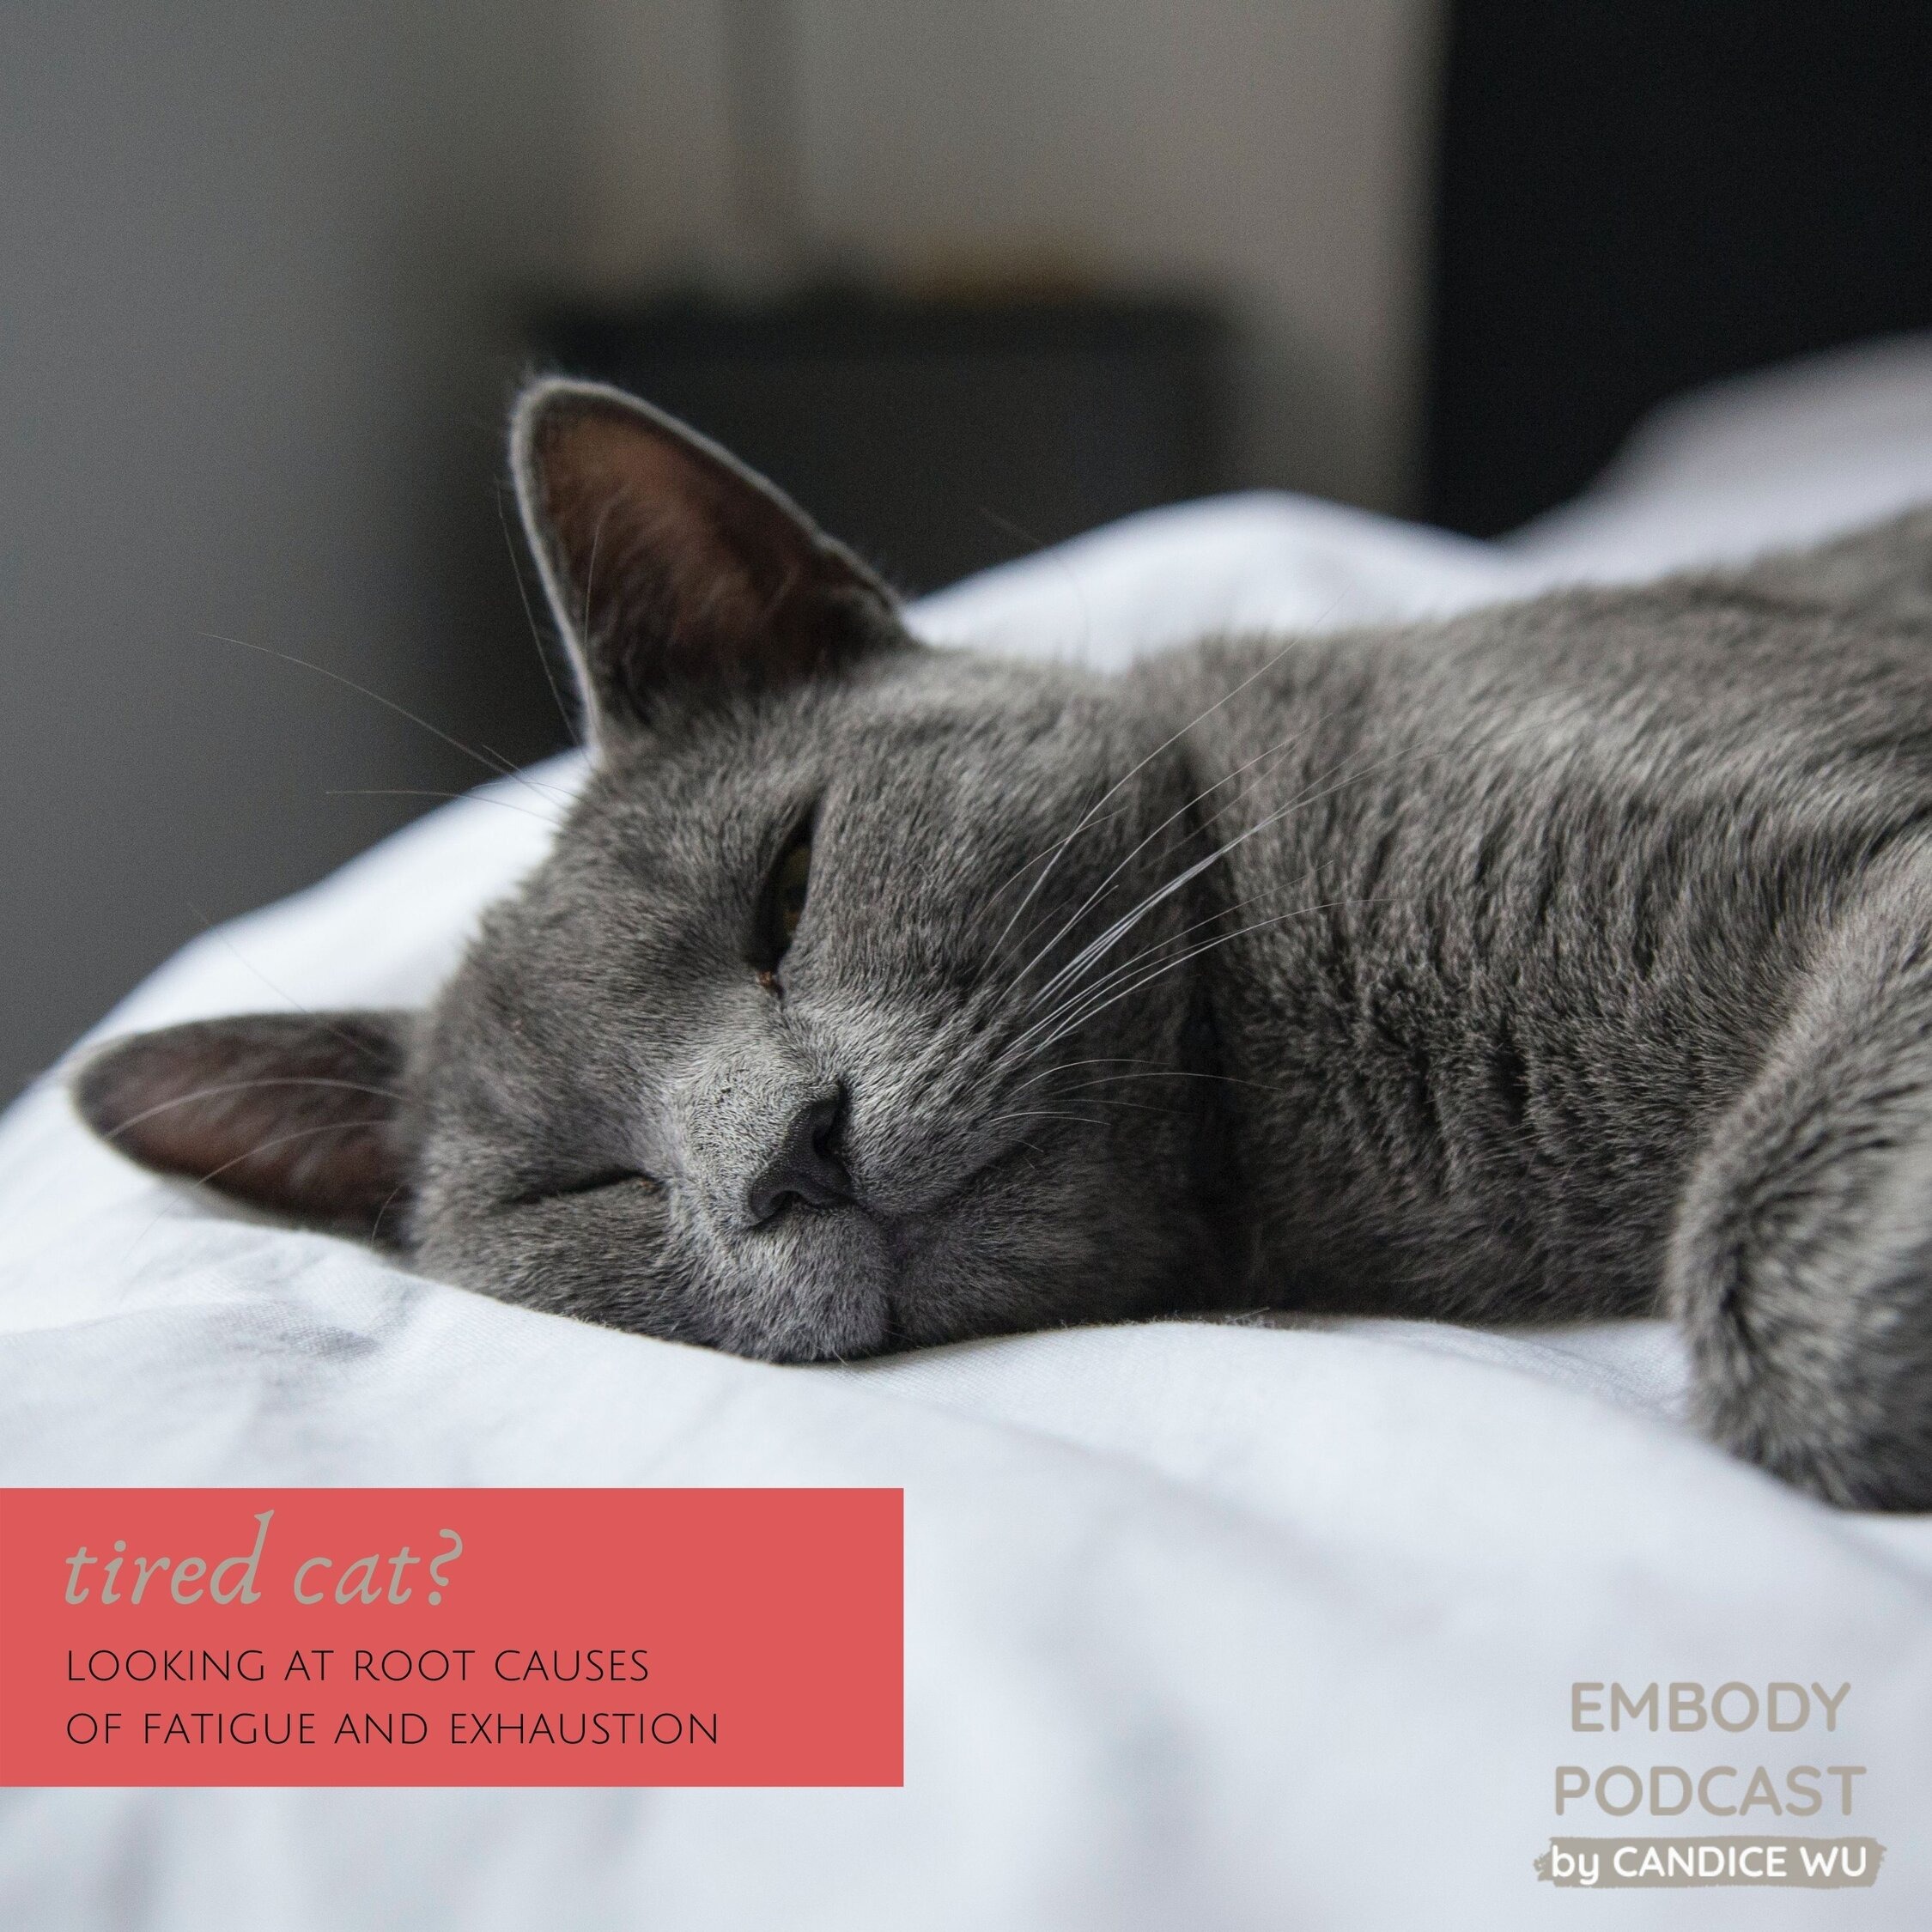 164: Tired Cat? Looking at Root Causes of Fatigue and Exhaustion